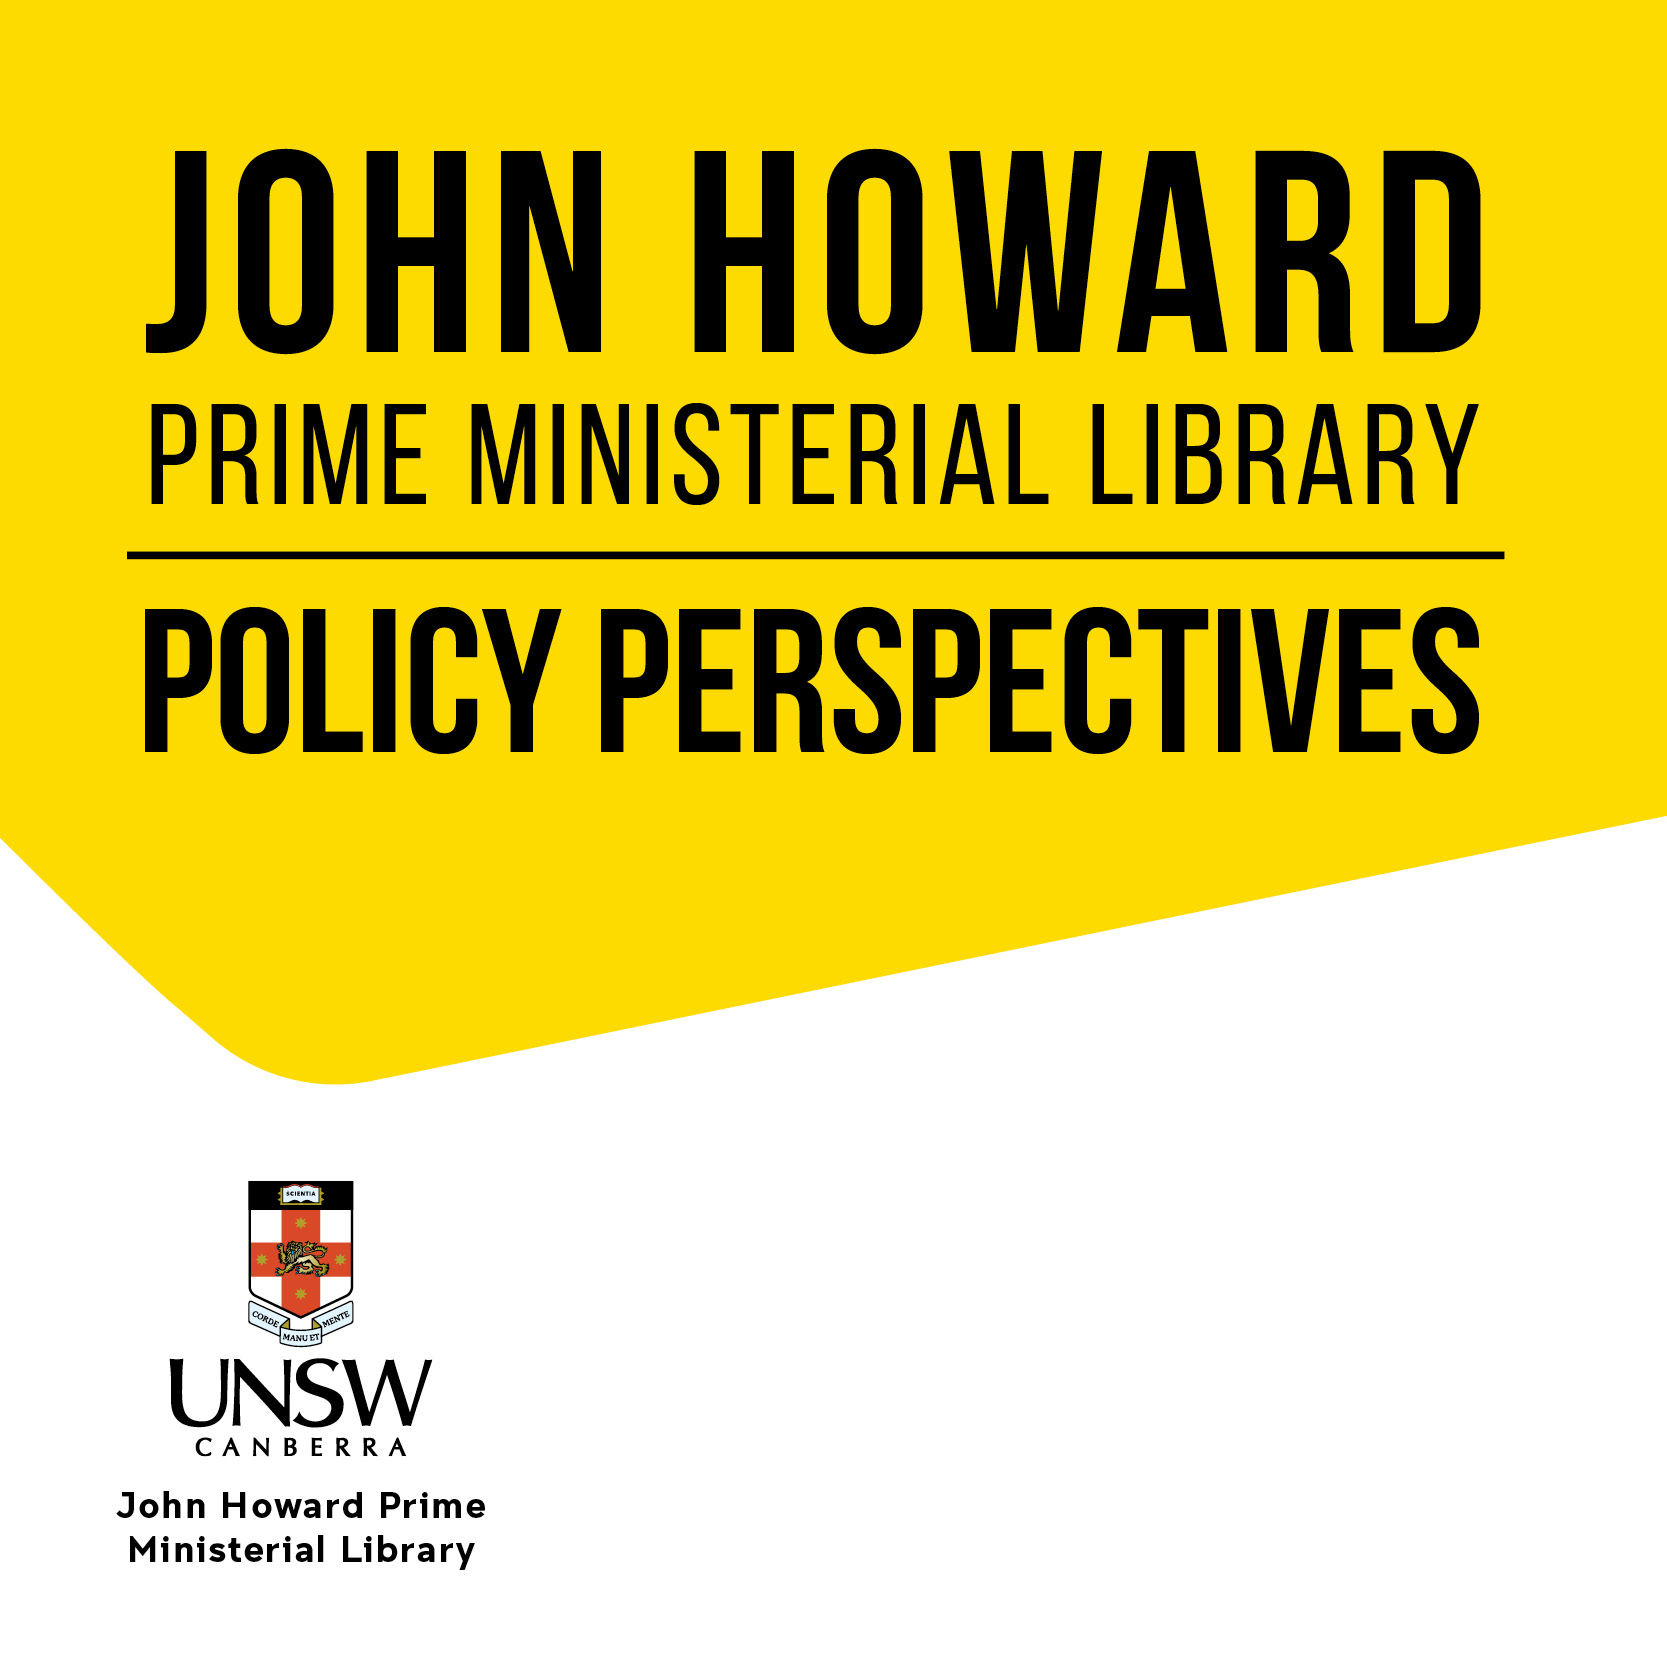 Policy Perspectives